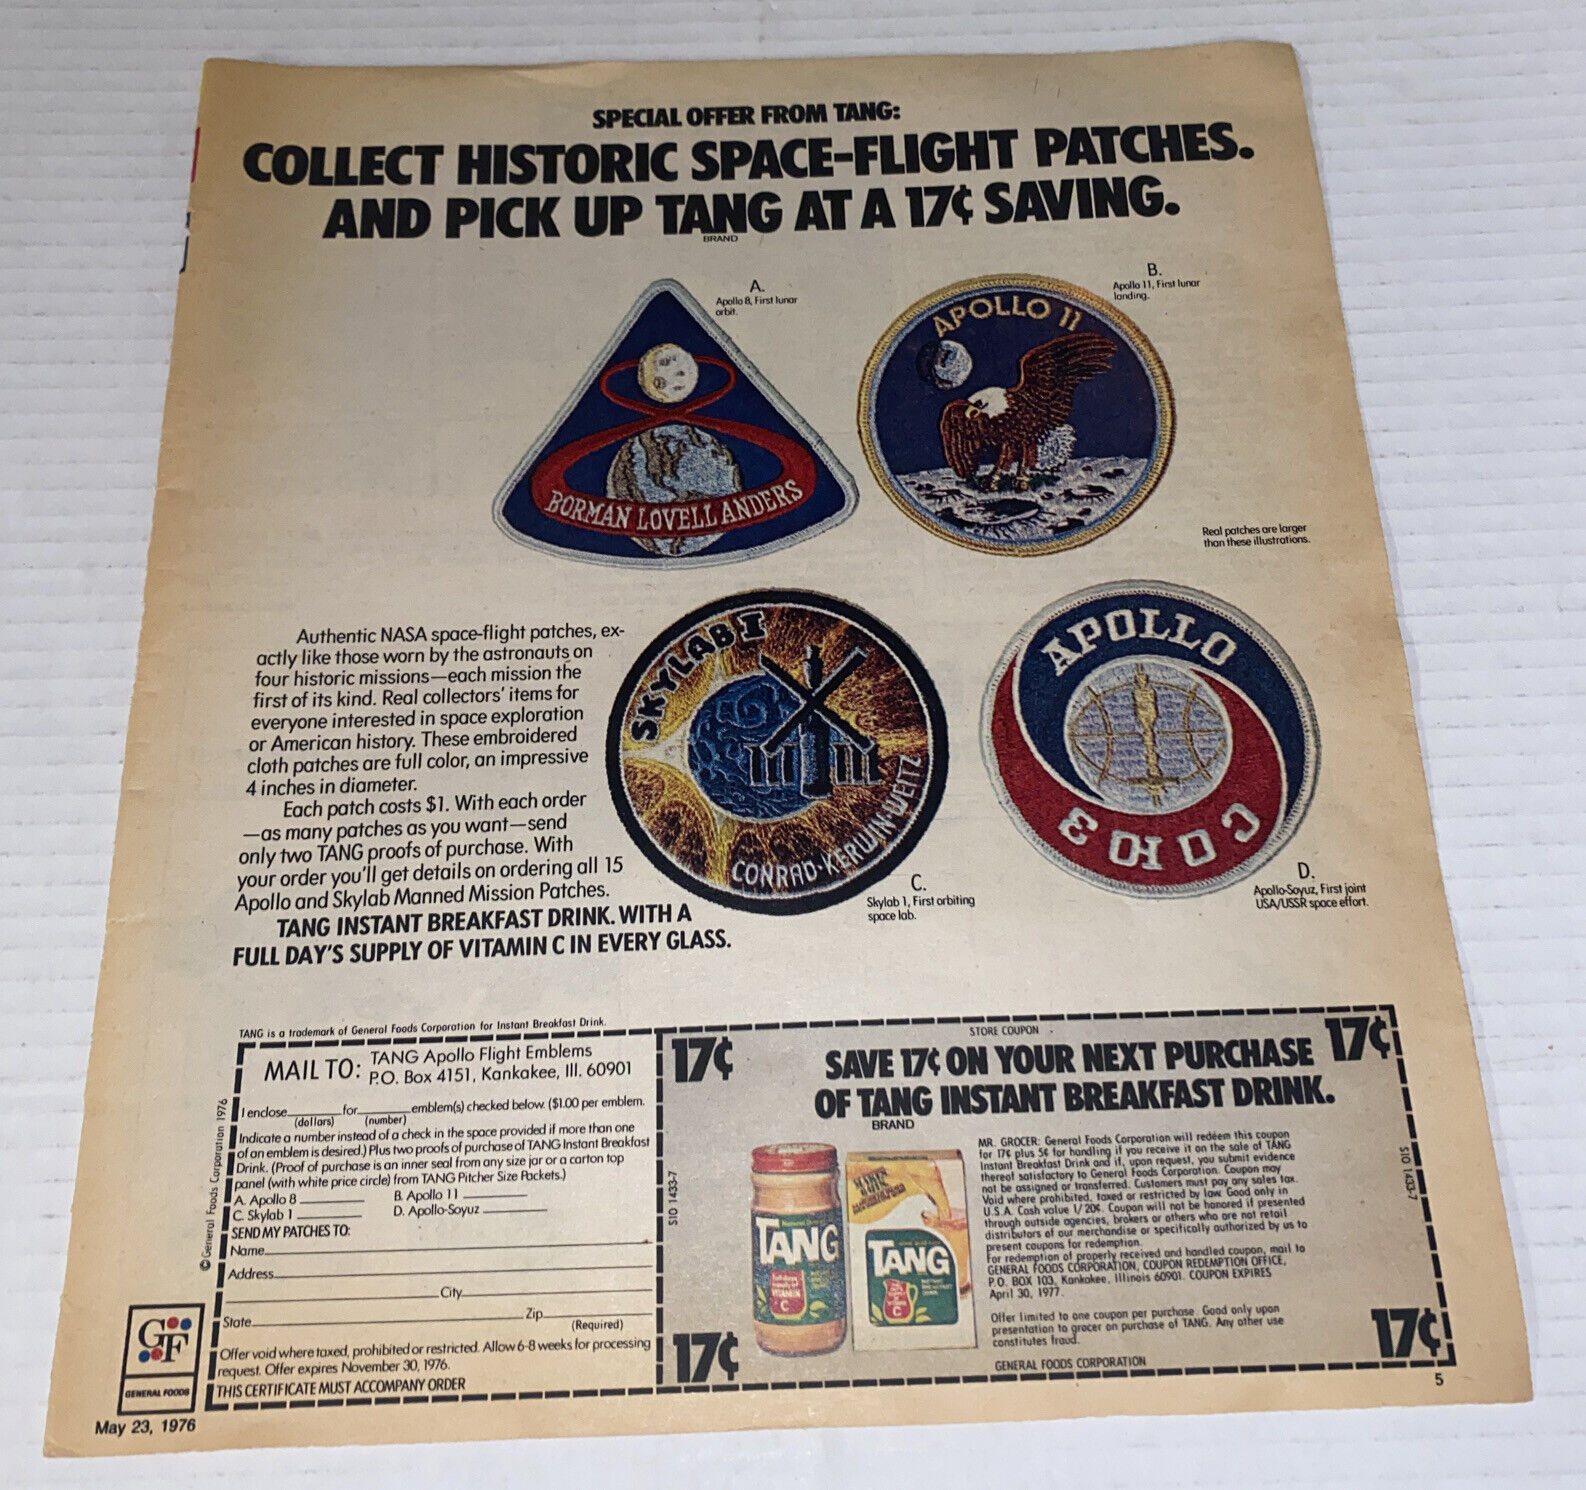 Vintage 1970s TANG Apollo Print AD Space Flight Patches Exp. Offer NASA Skylab